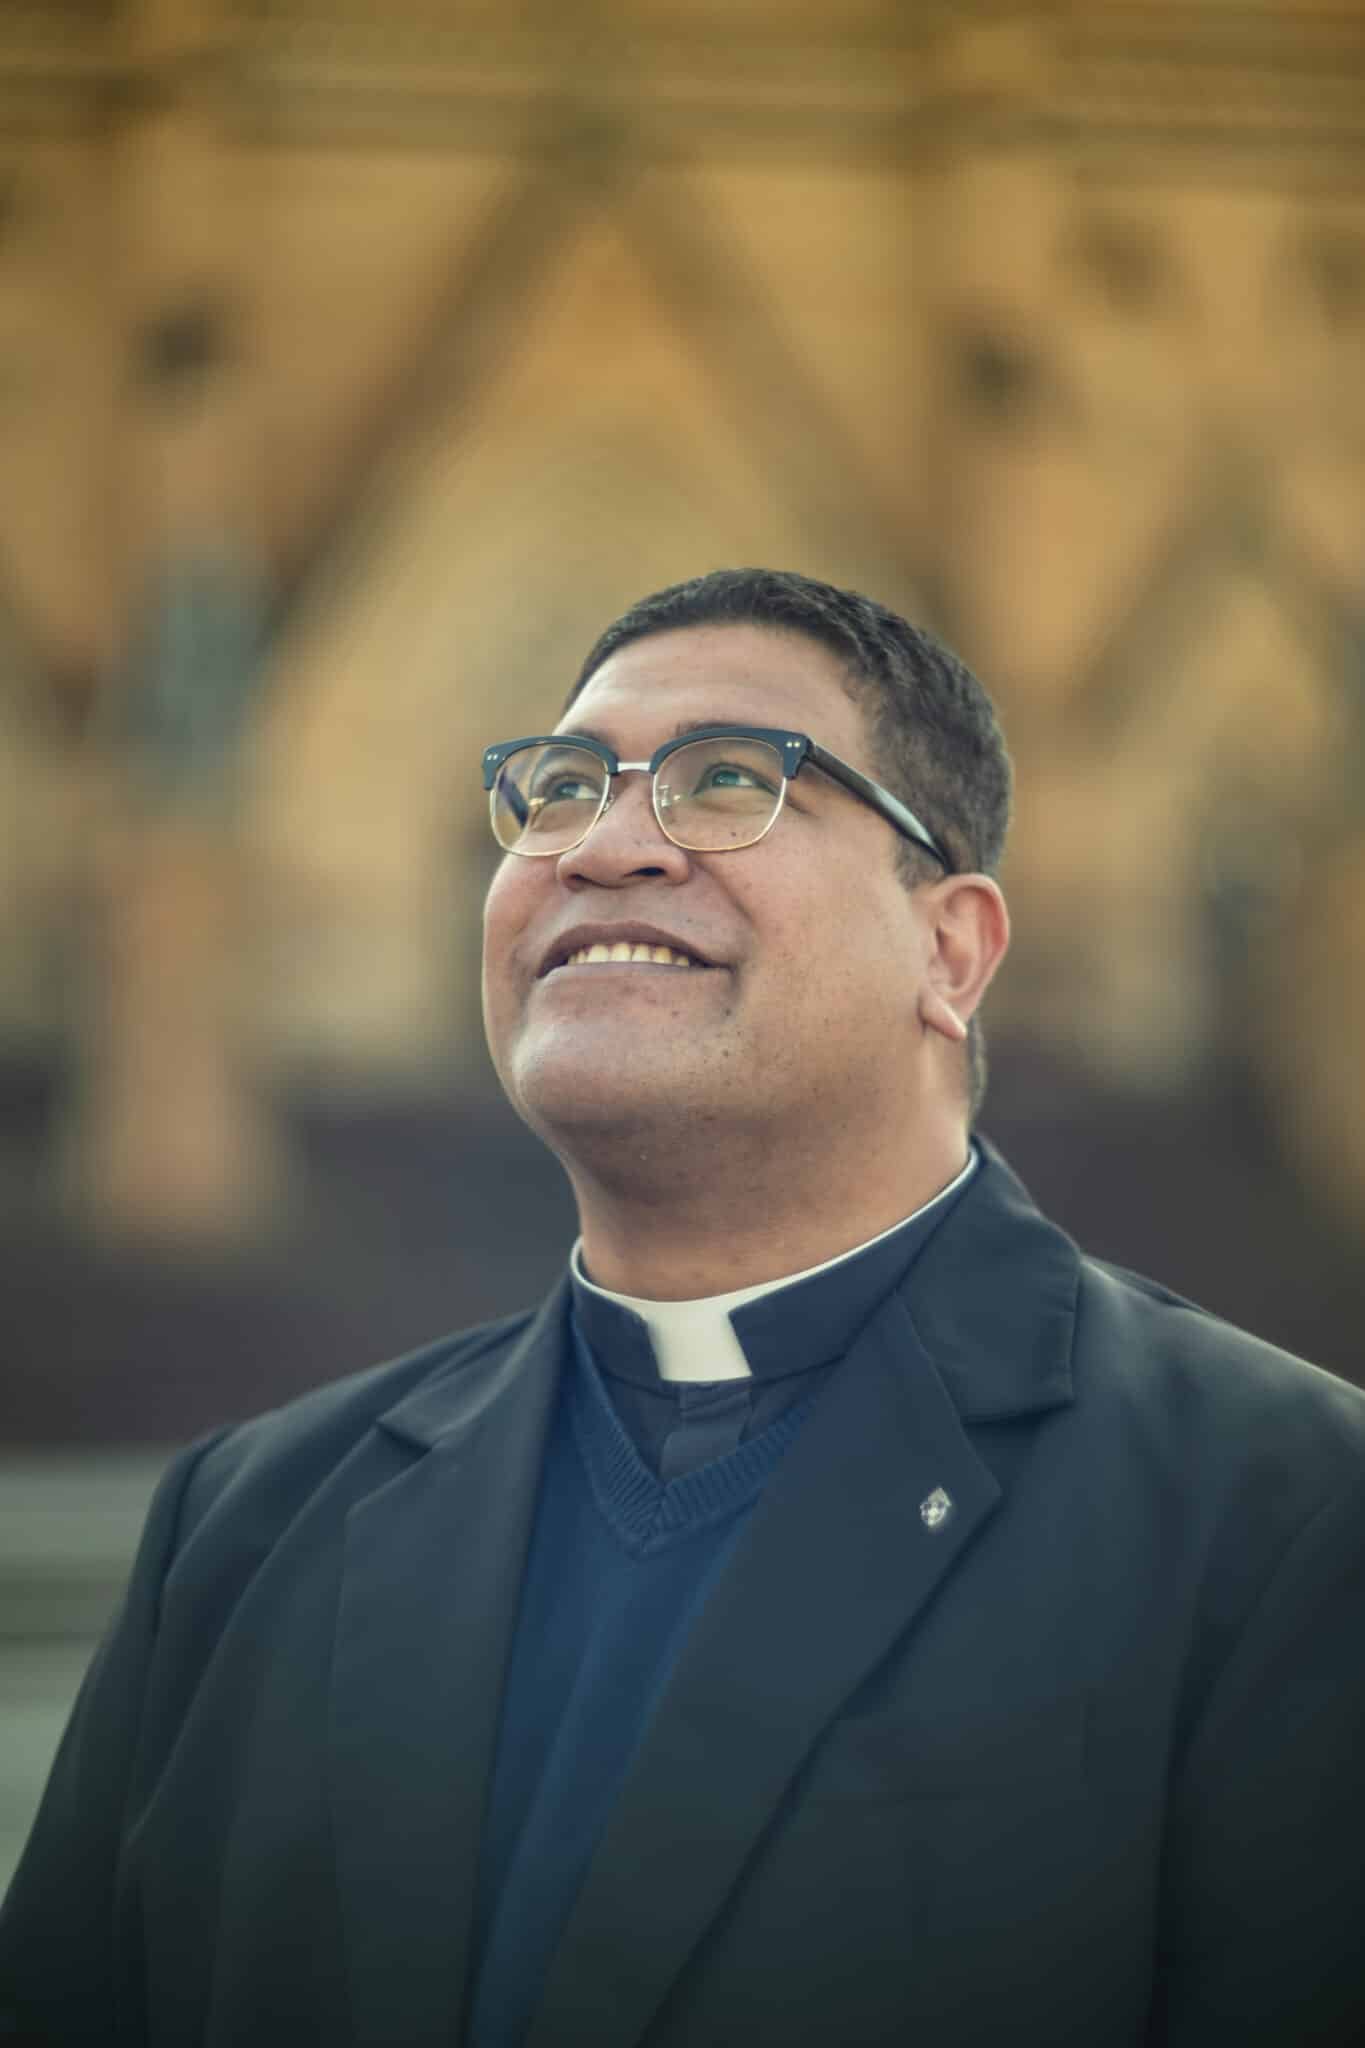 vocation to priesthood - The Catholic Weekly